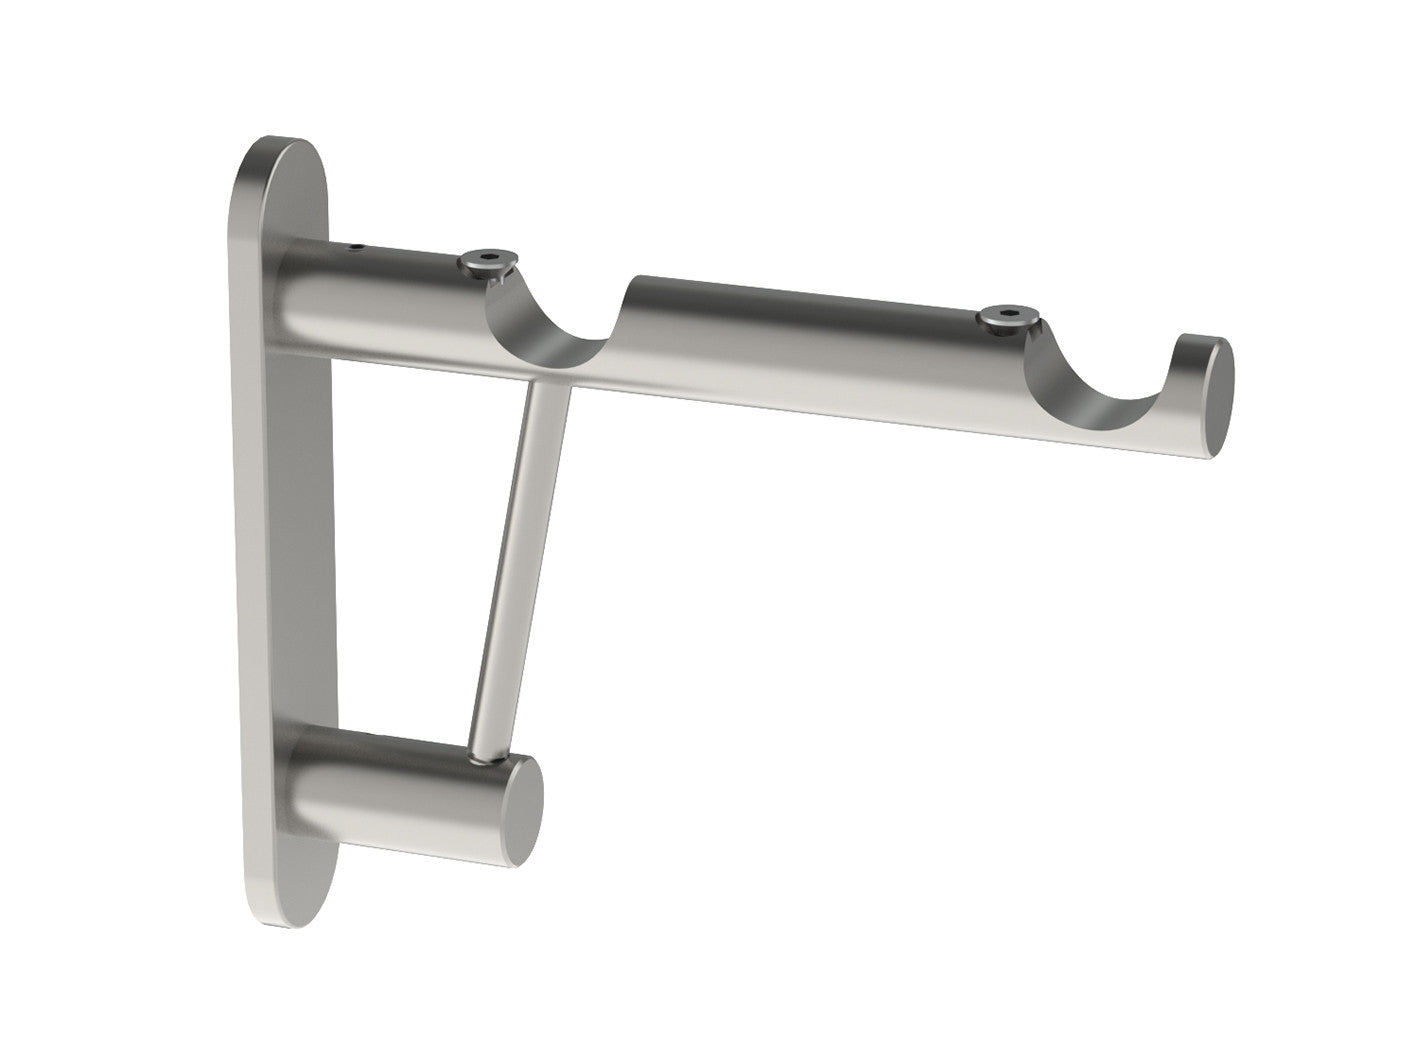 stainless steel double bracket for 19mm poles by Walcot House